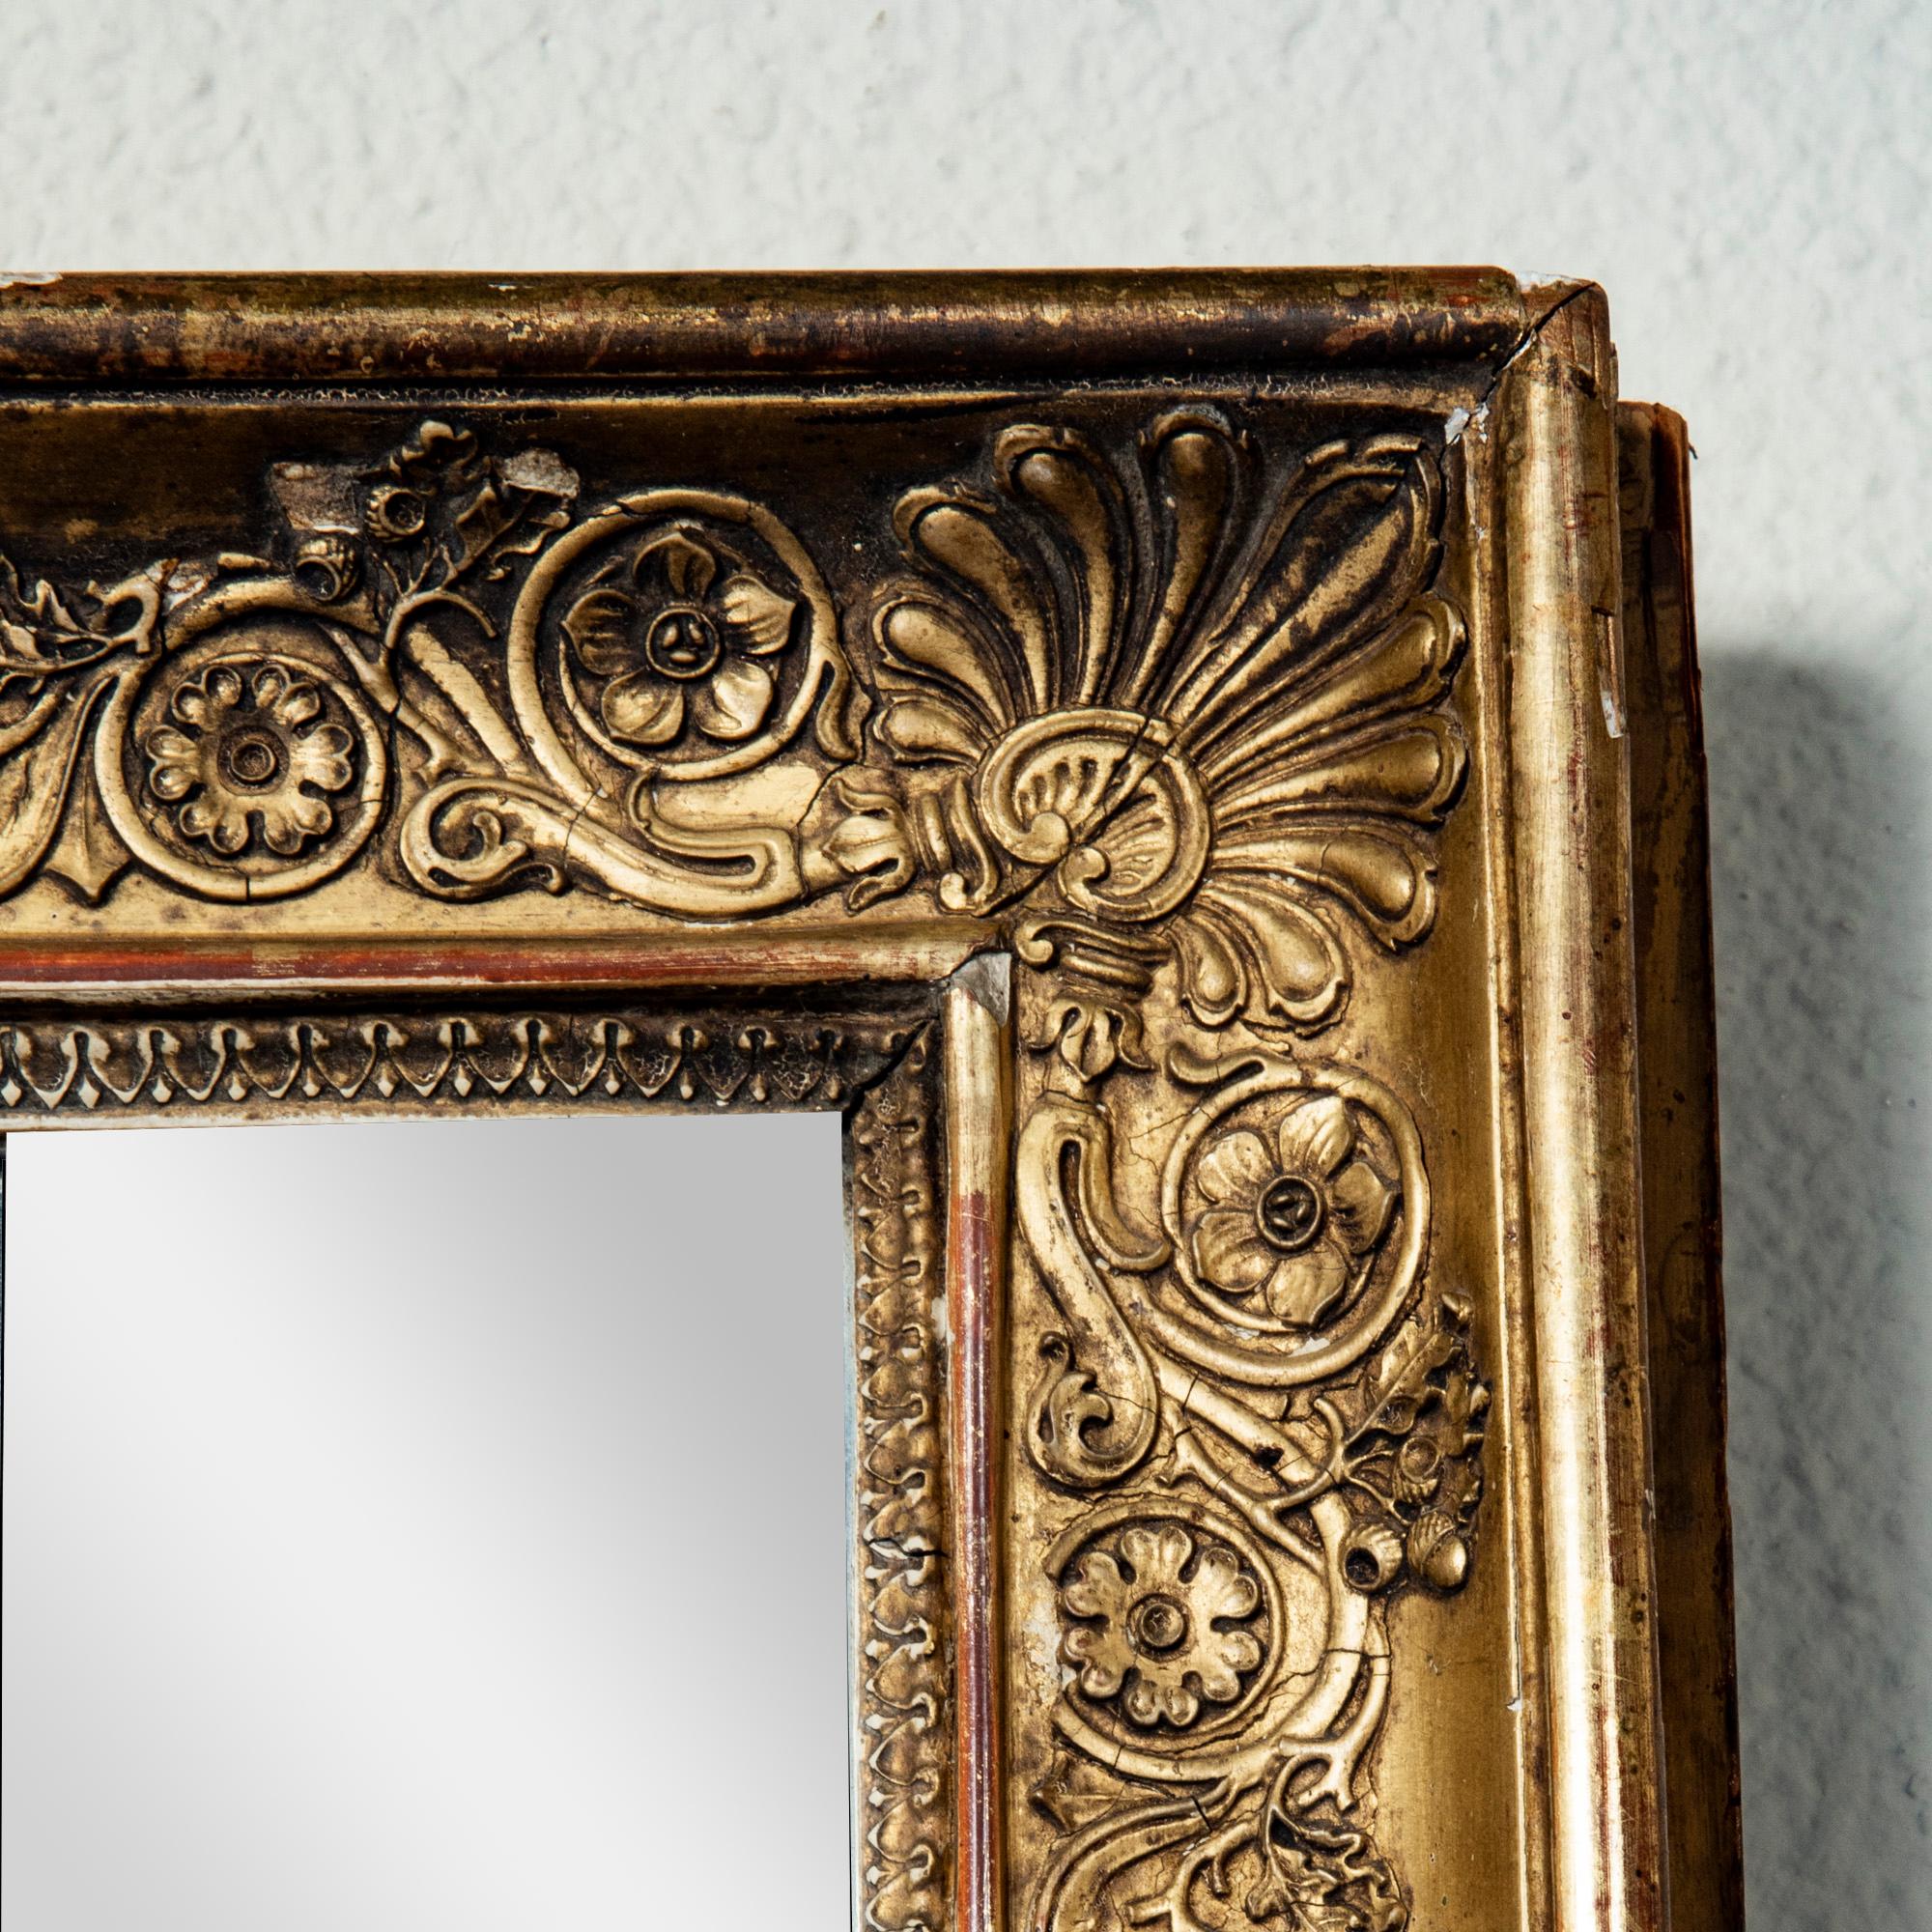 Narrow Early 19th Century French Restauration Period Giltwood Mirror For Sale 5